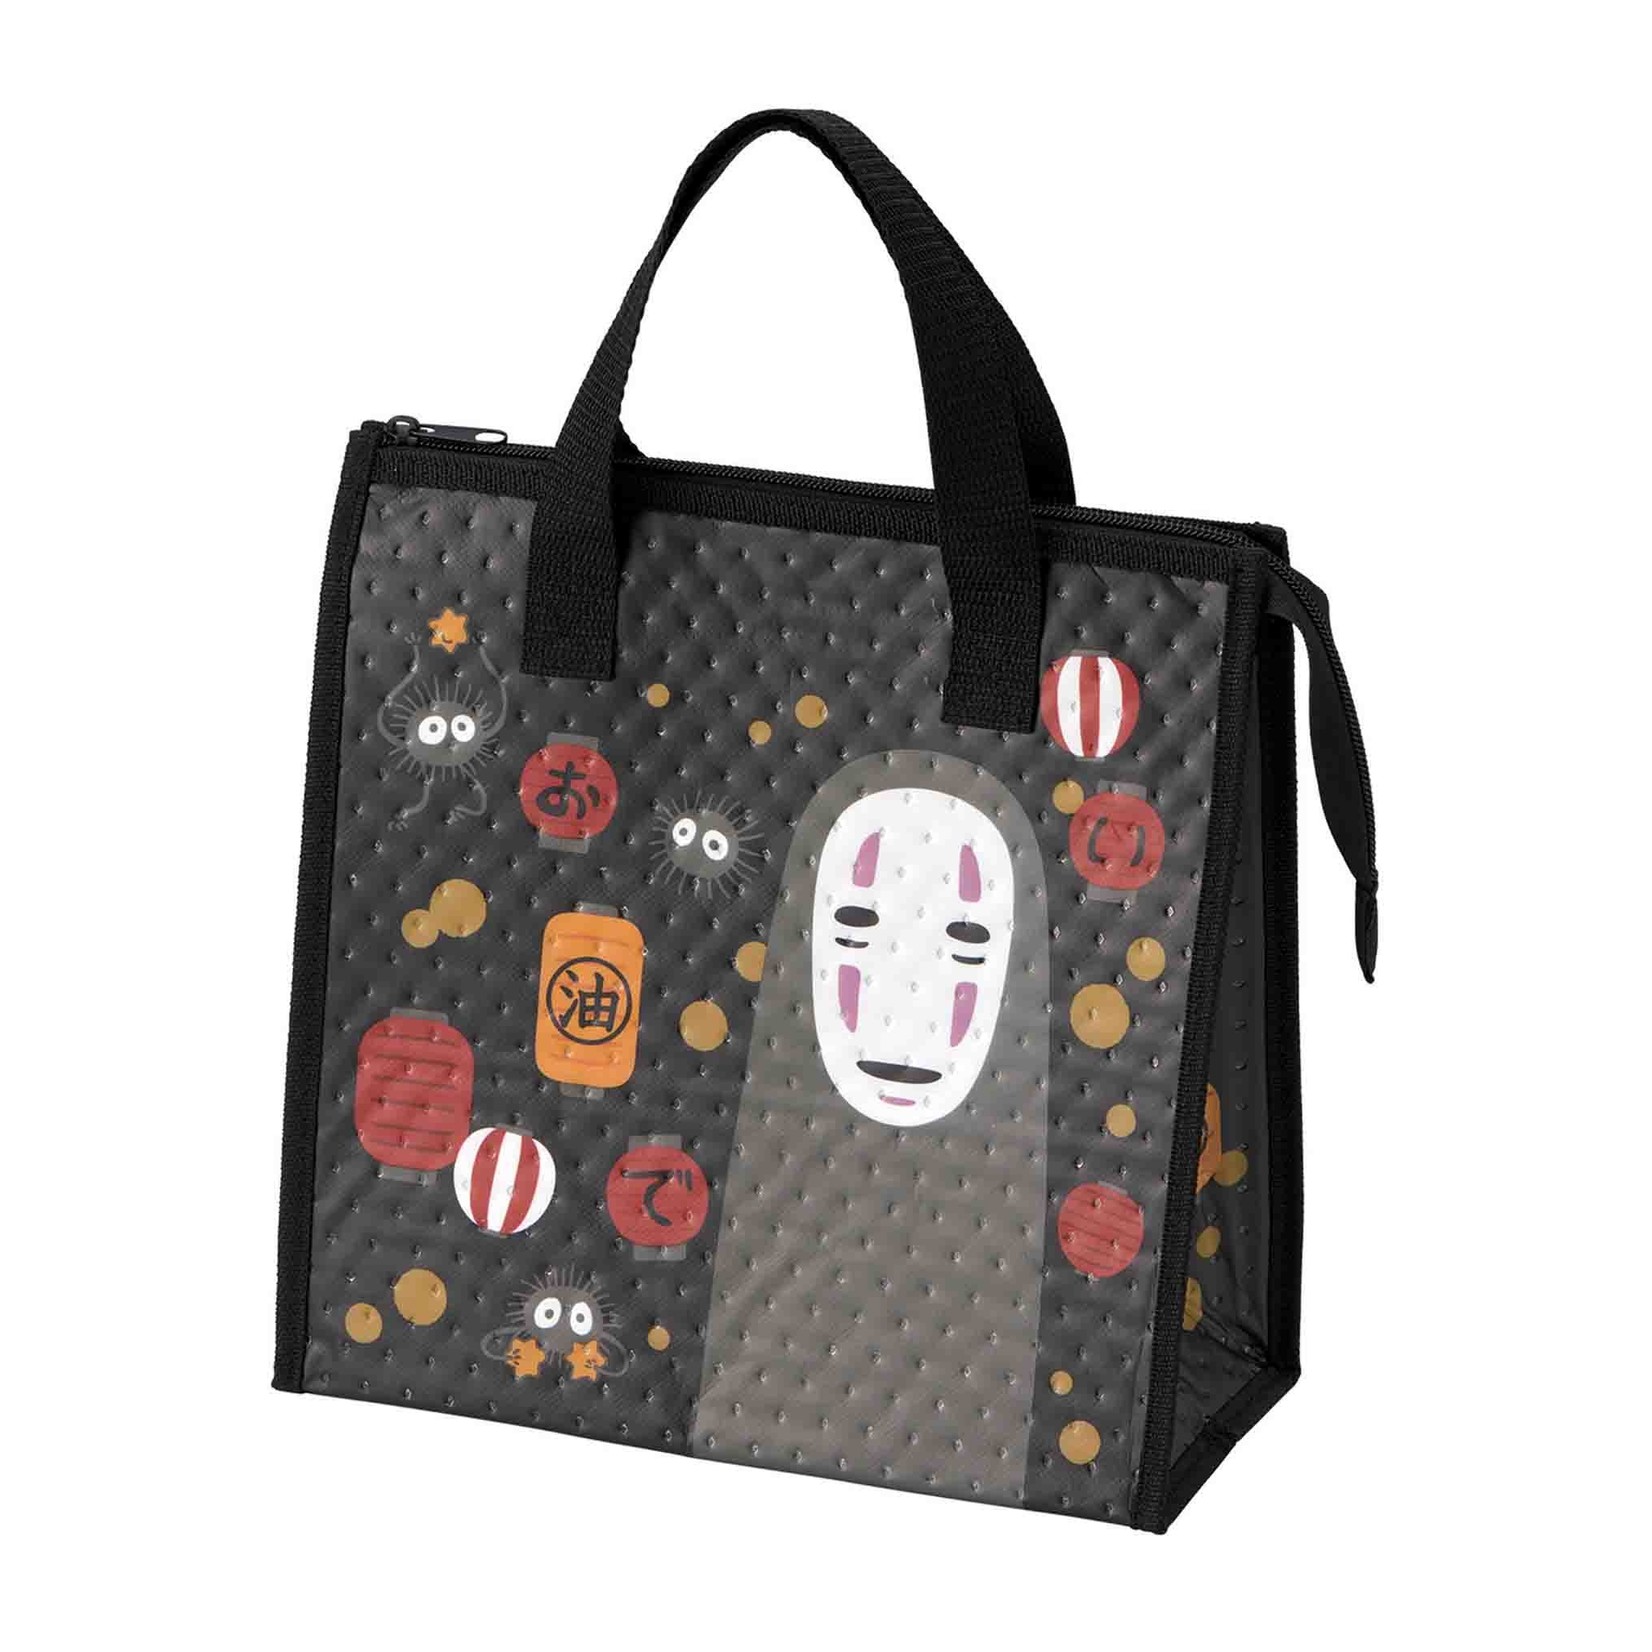 Skater Insulated Lunch Tote - Spirited Away (Lanterns) SK-088